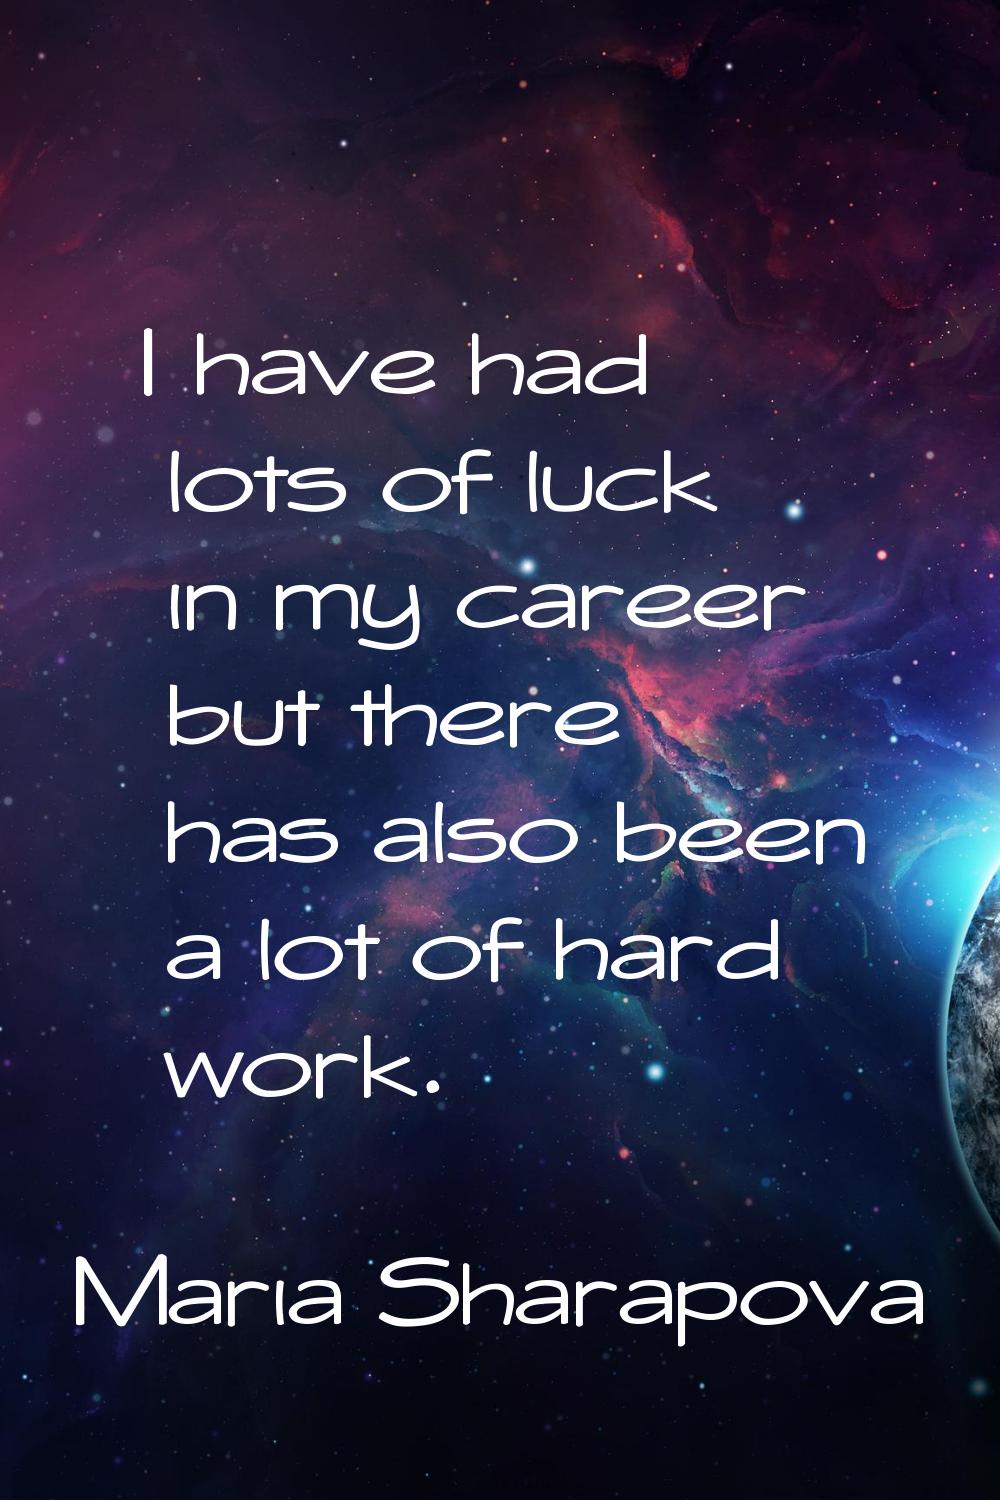 I have had lots of luck in my career but there has also been a lot of hard work.